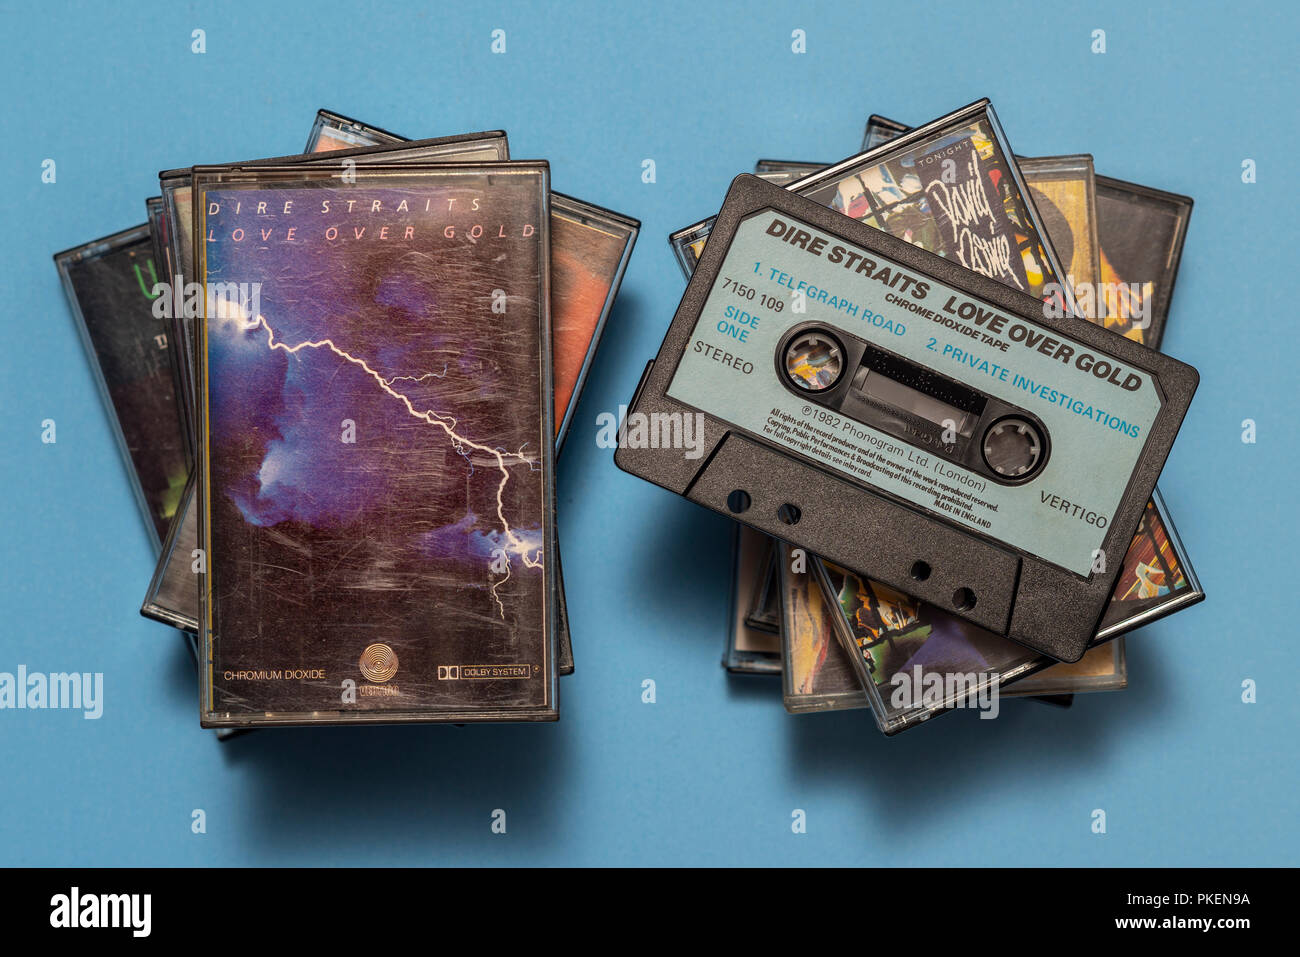 compact audio cassette of Dire Straights, Love over Gold album with art work. Stock Photo